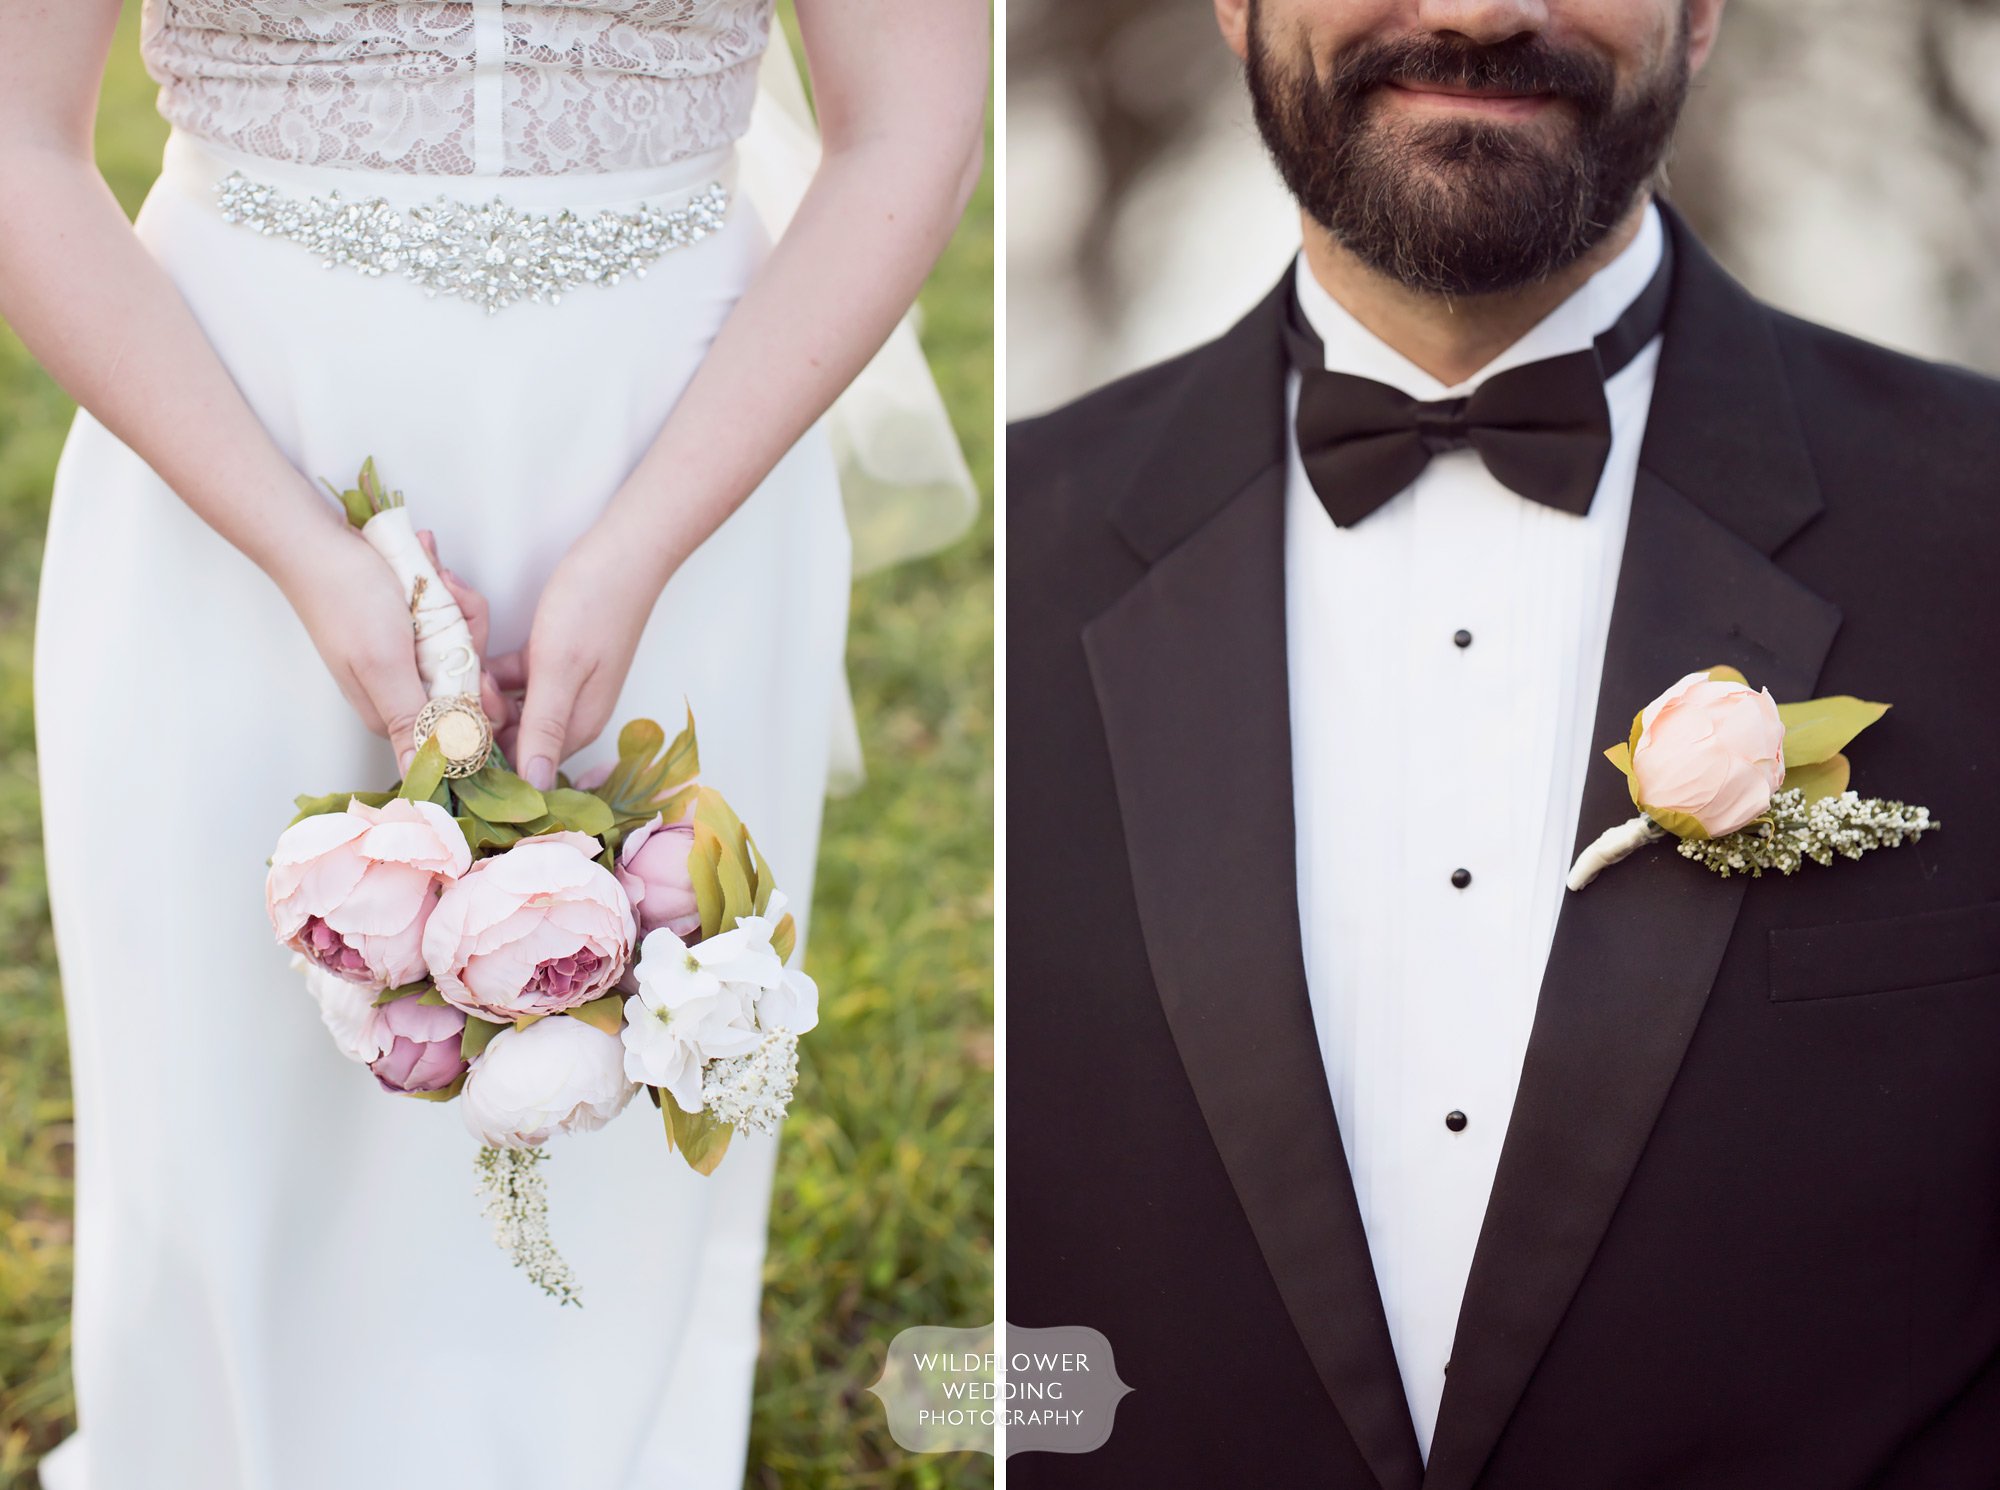 Rustic elopement flowers for an April outdoor wedding in Nifong Park.